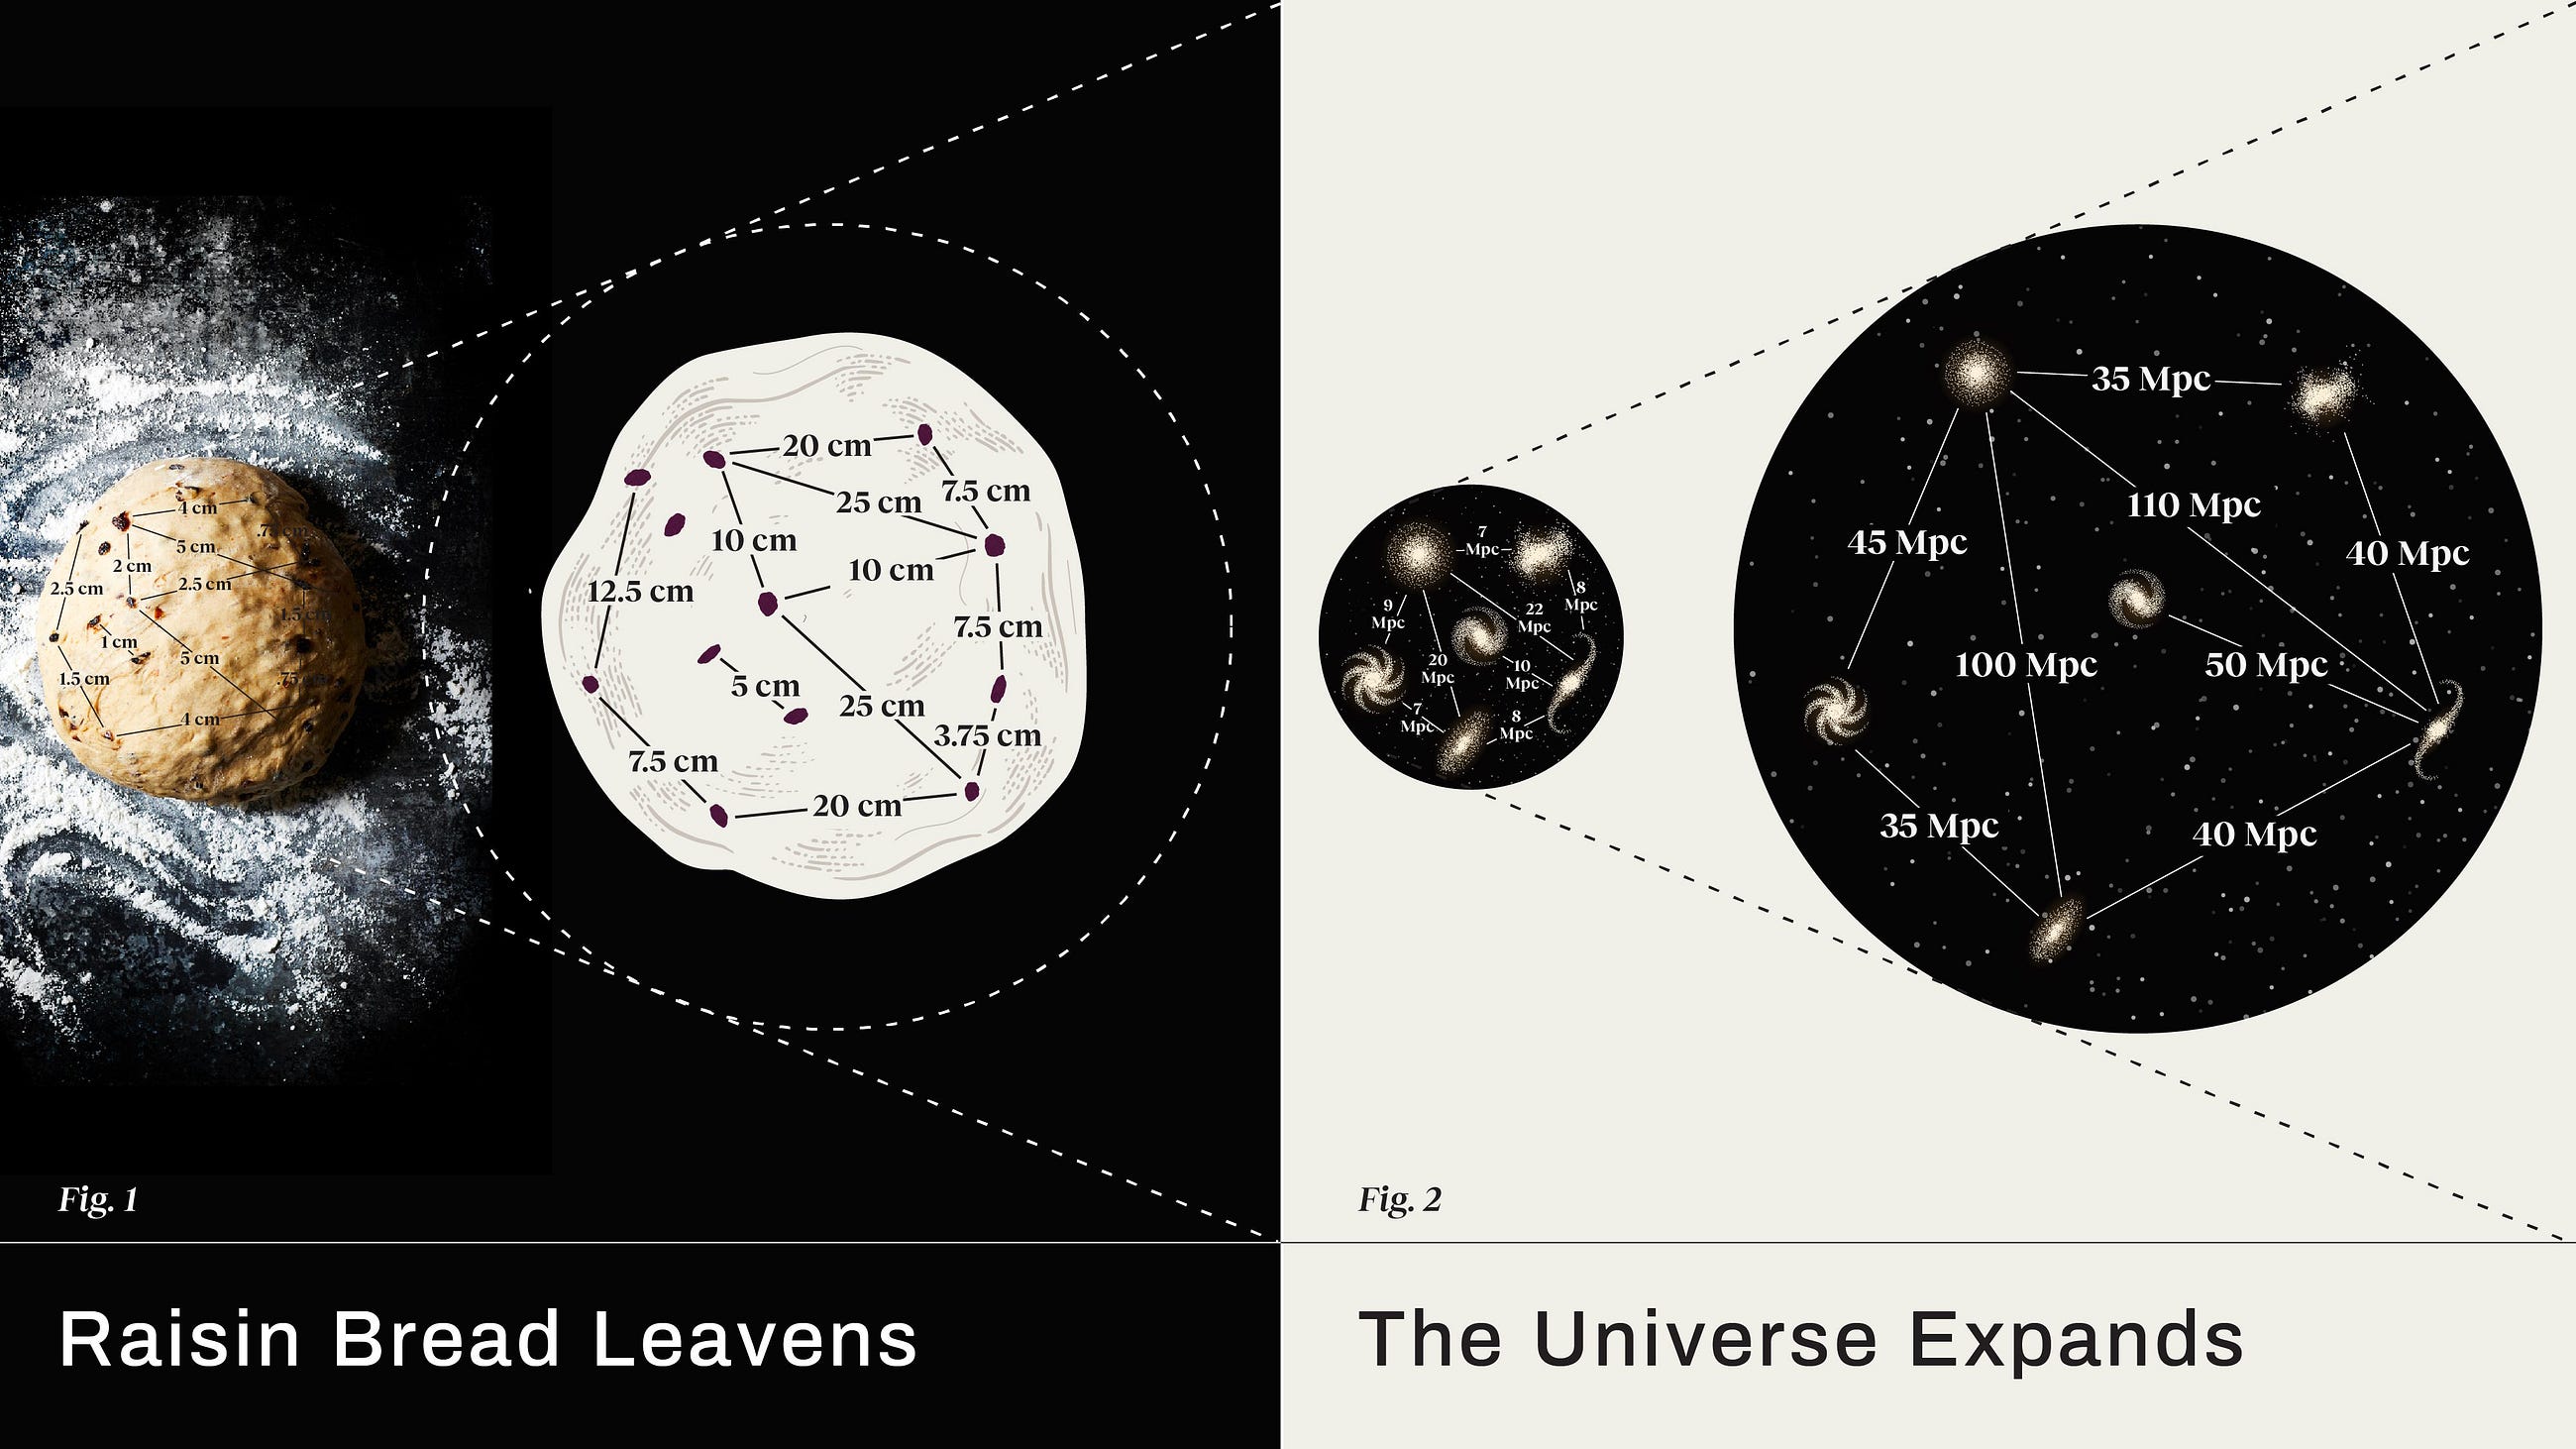 Does the Universe expand by stretching or creating space-